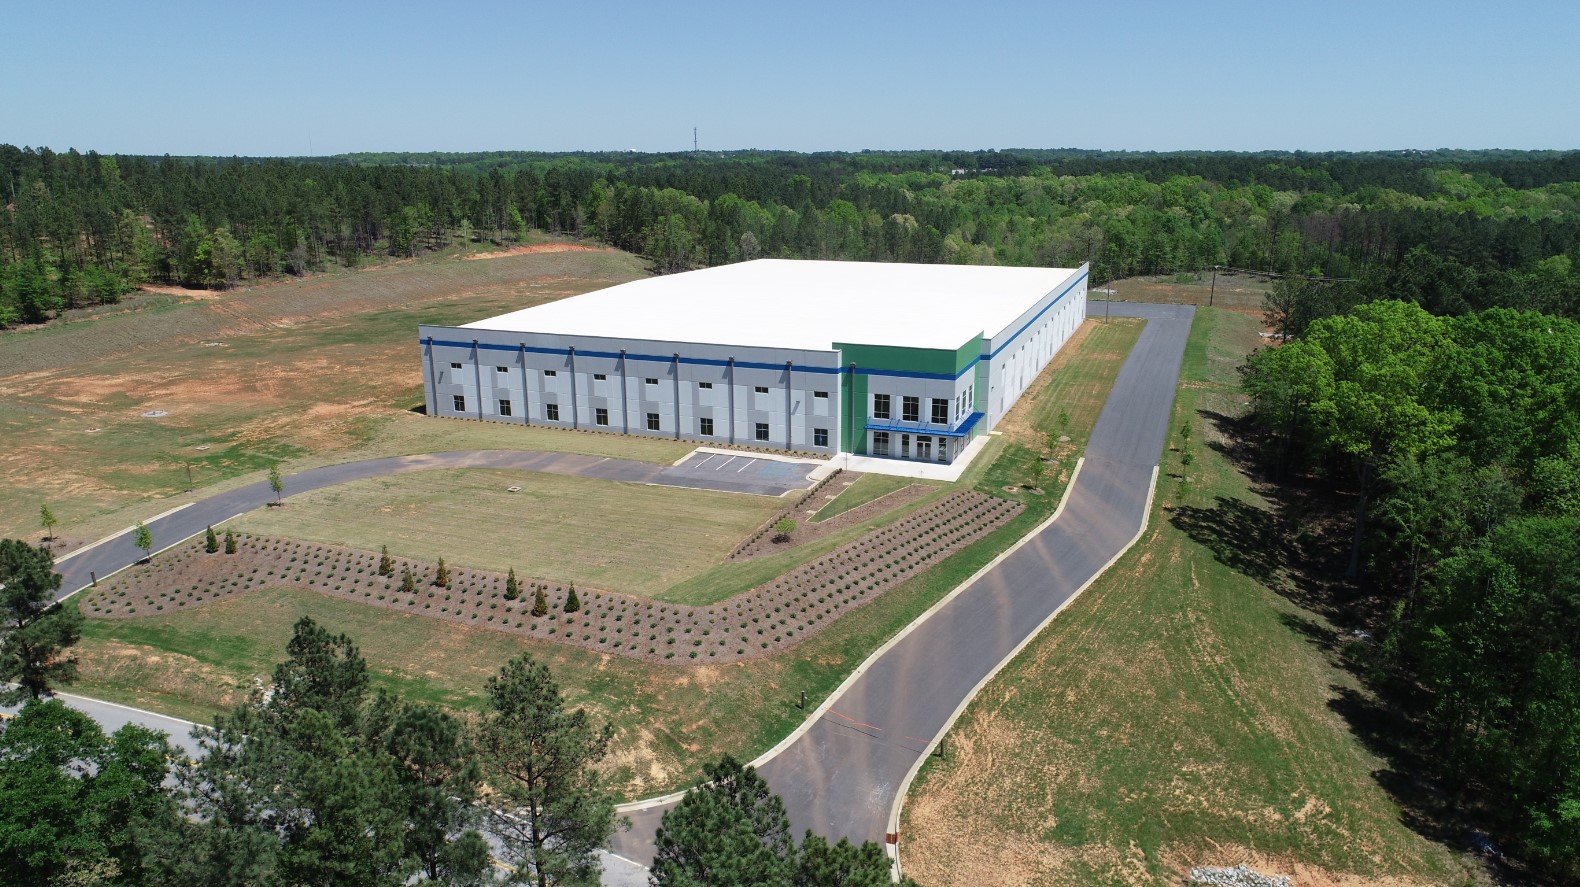 will invest more than $50 million to expand and improve an existing warehouse at 260 Midway Drive in Union, S.C. (Photo/Stream Realty Partners)